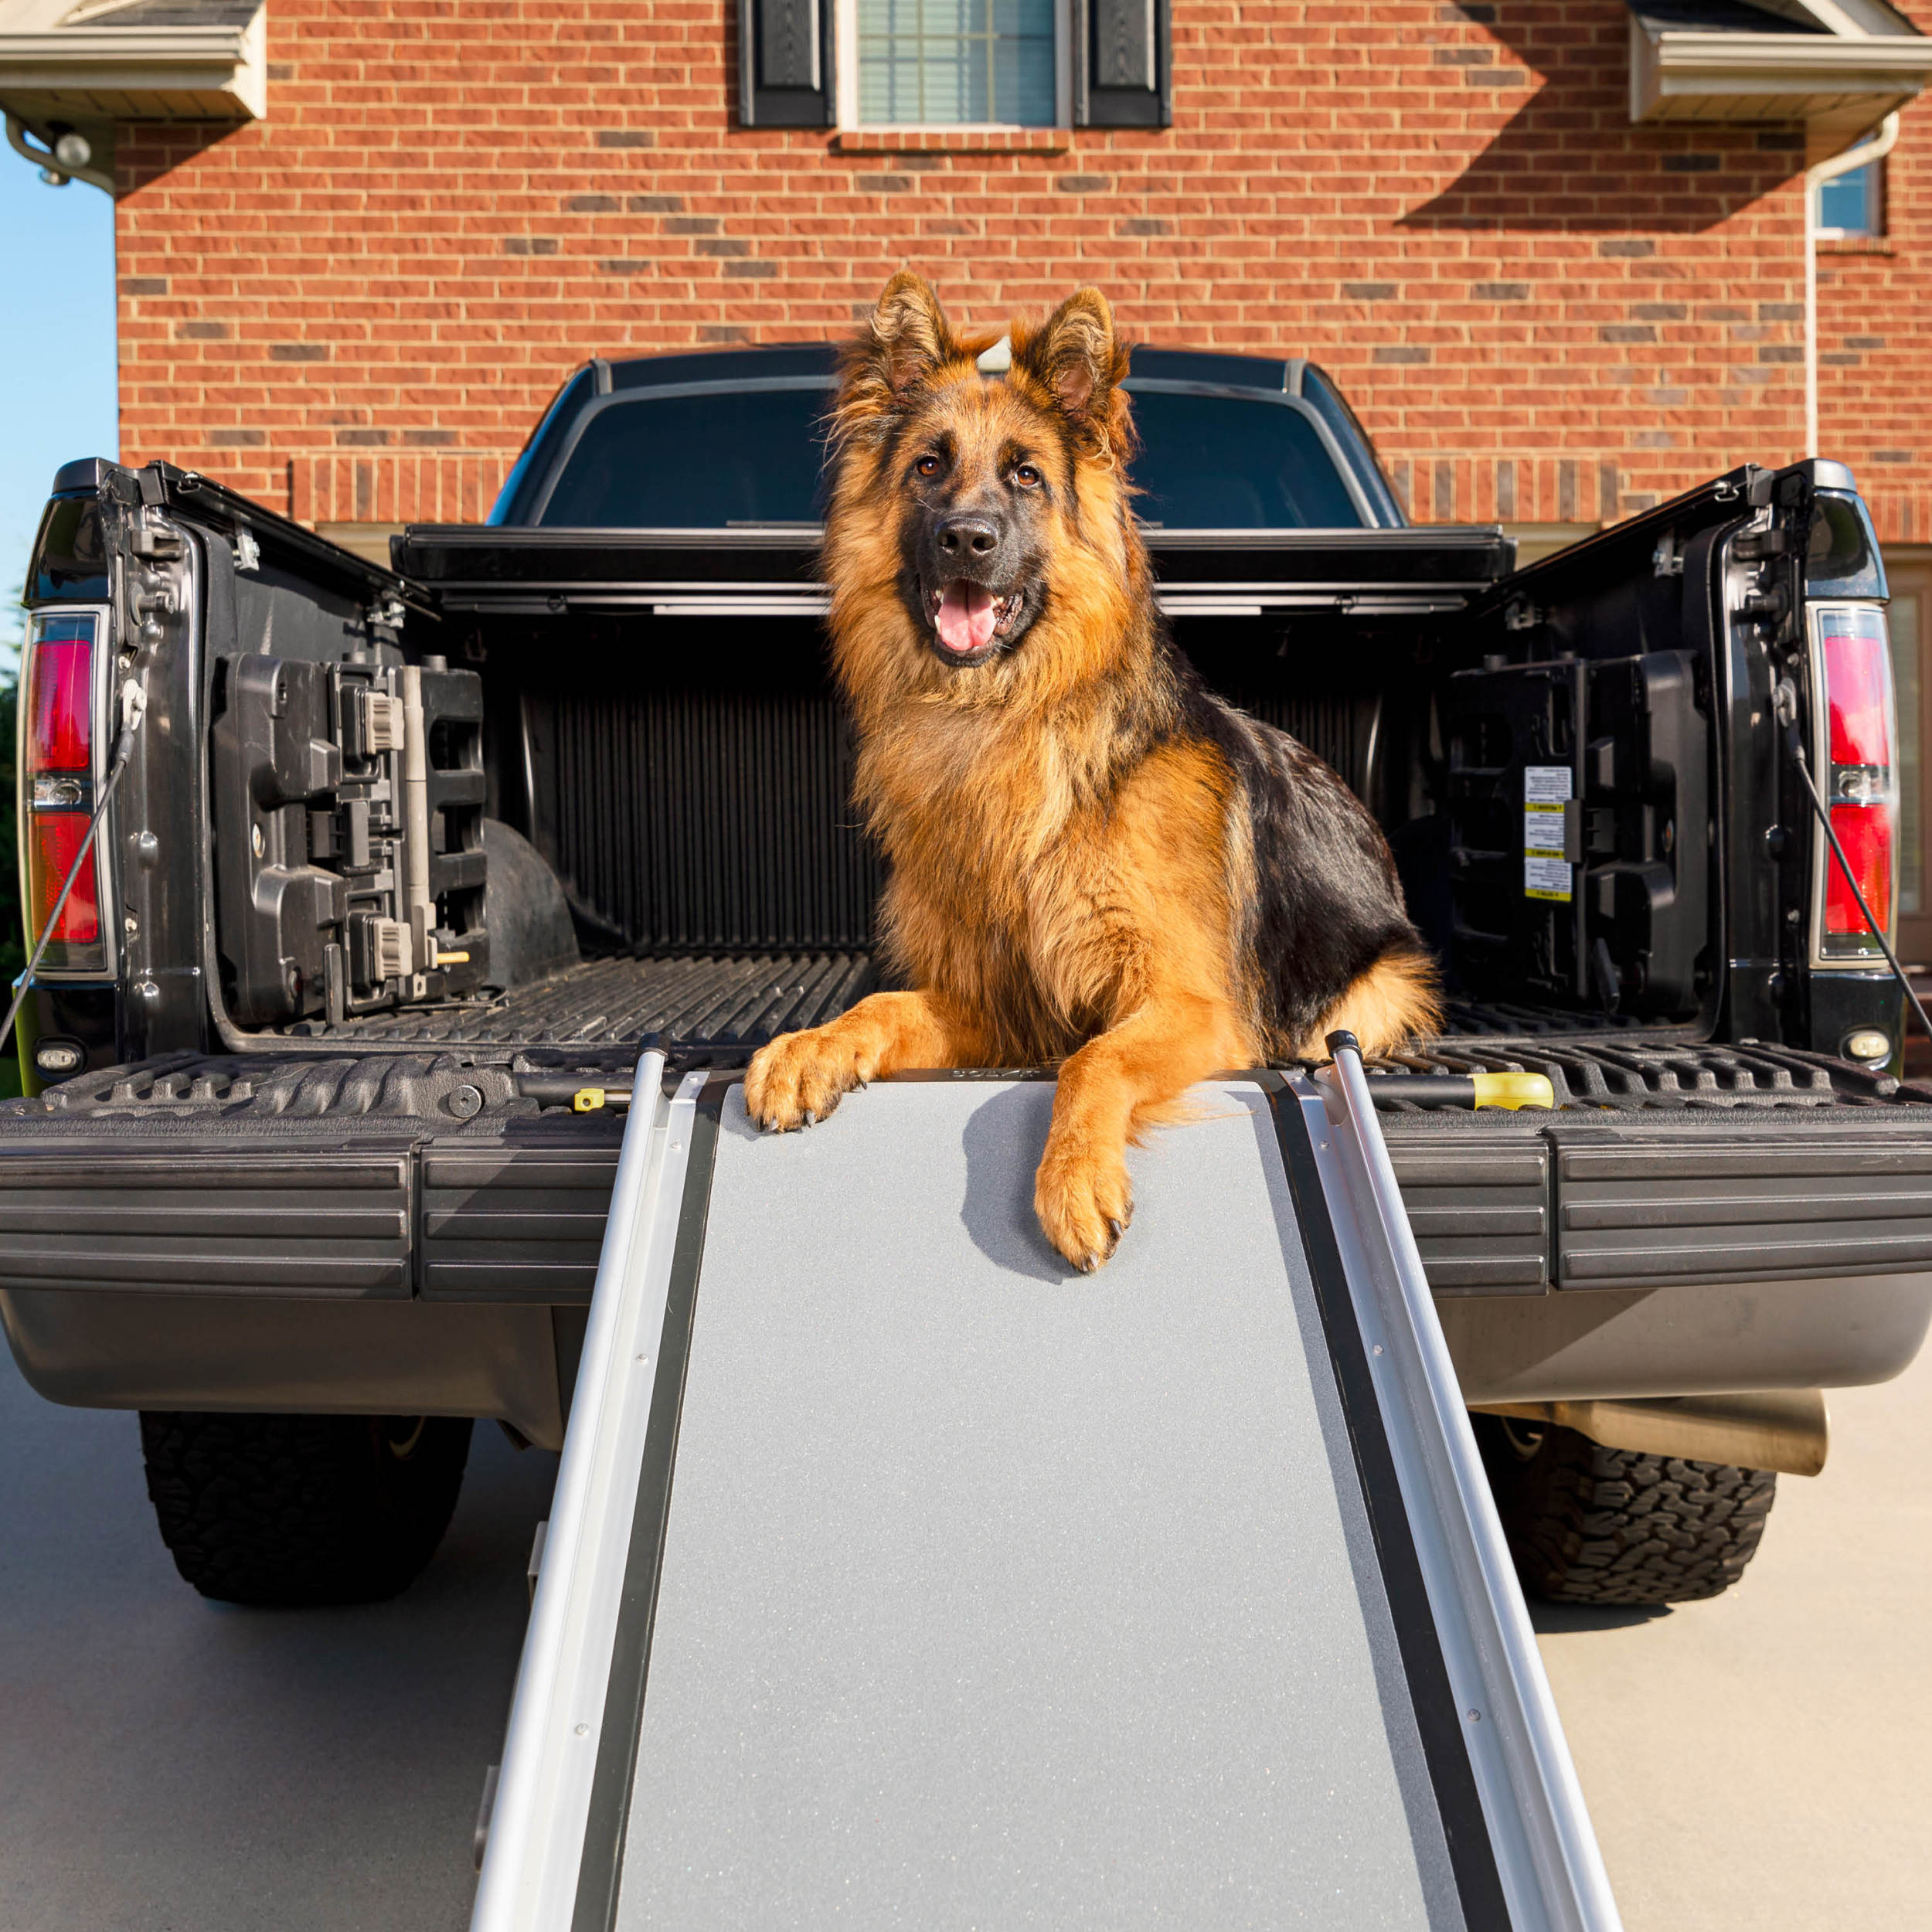 Safest Dog Car Harnesses and Pet Travel Carriers and Crates